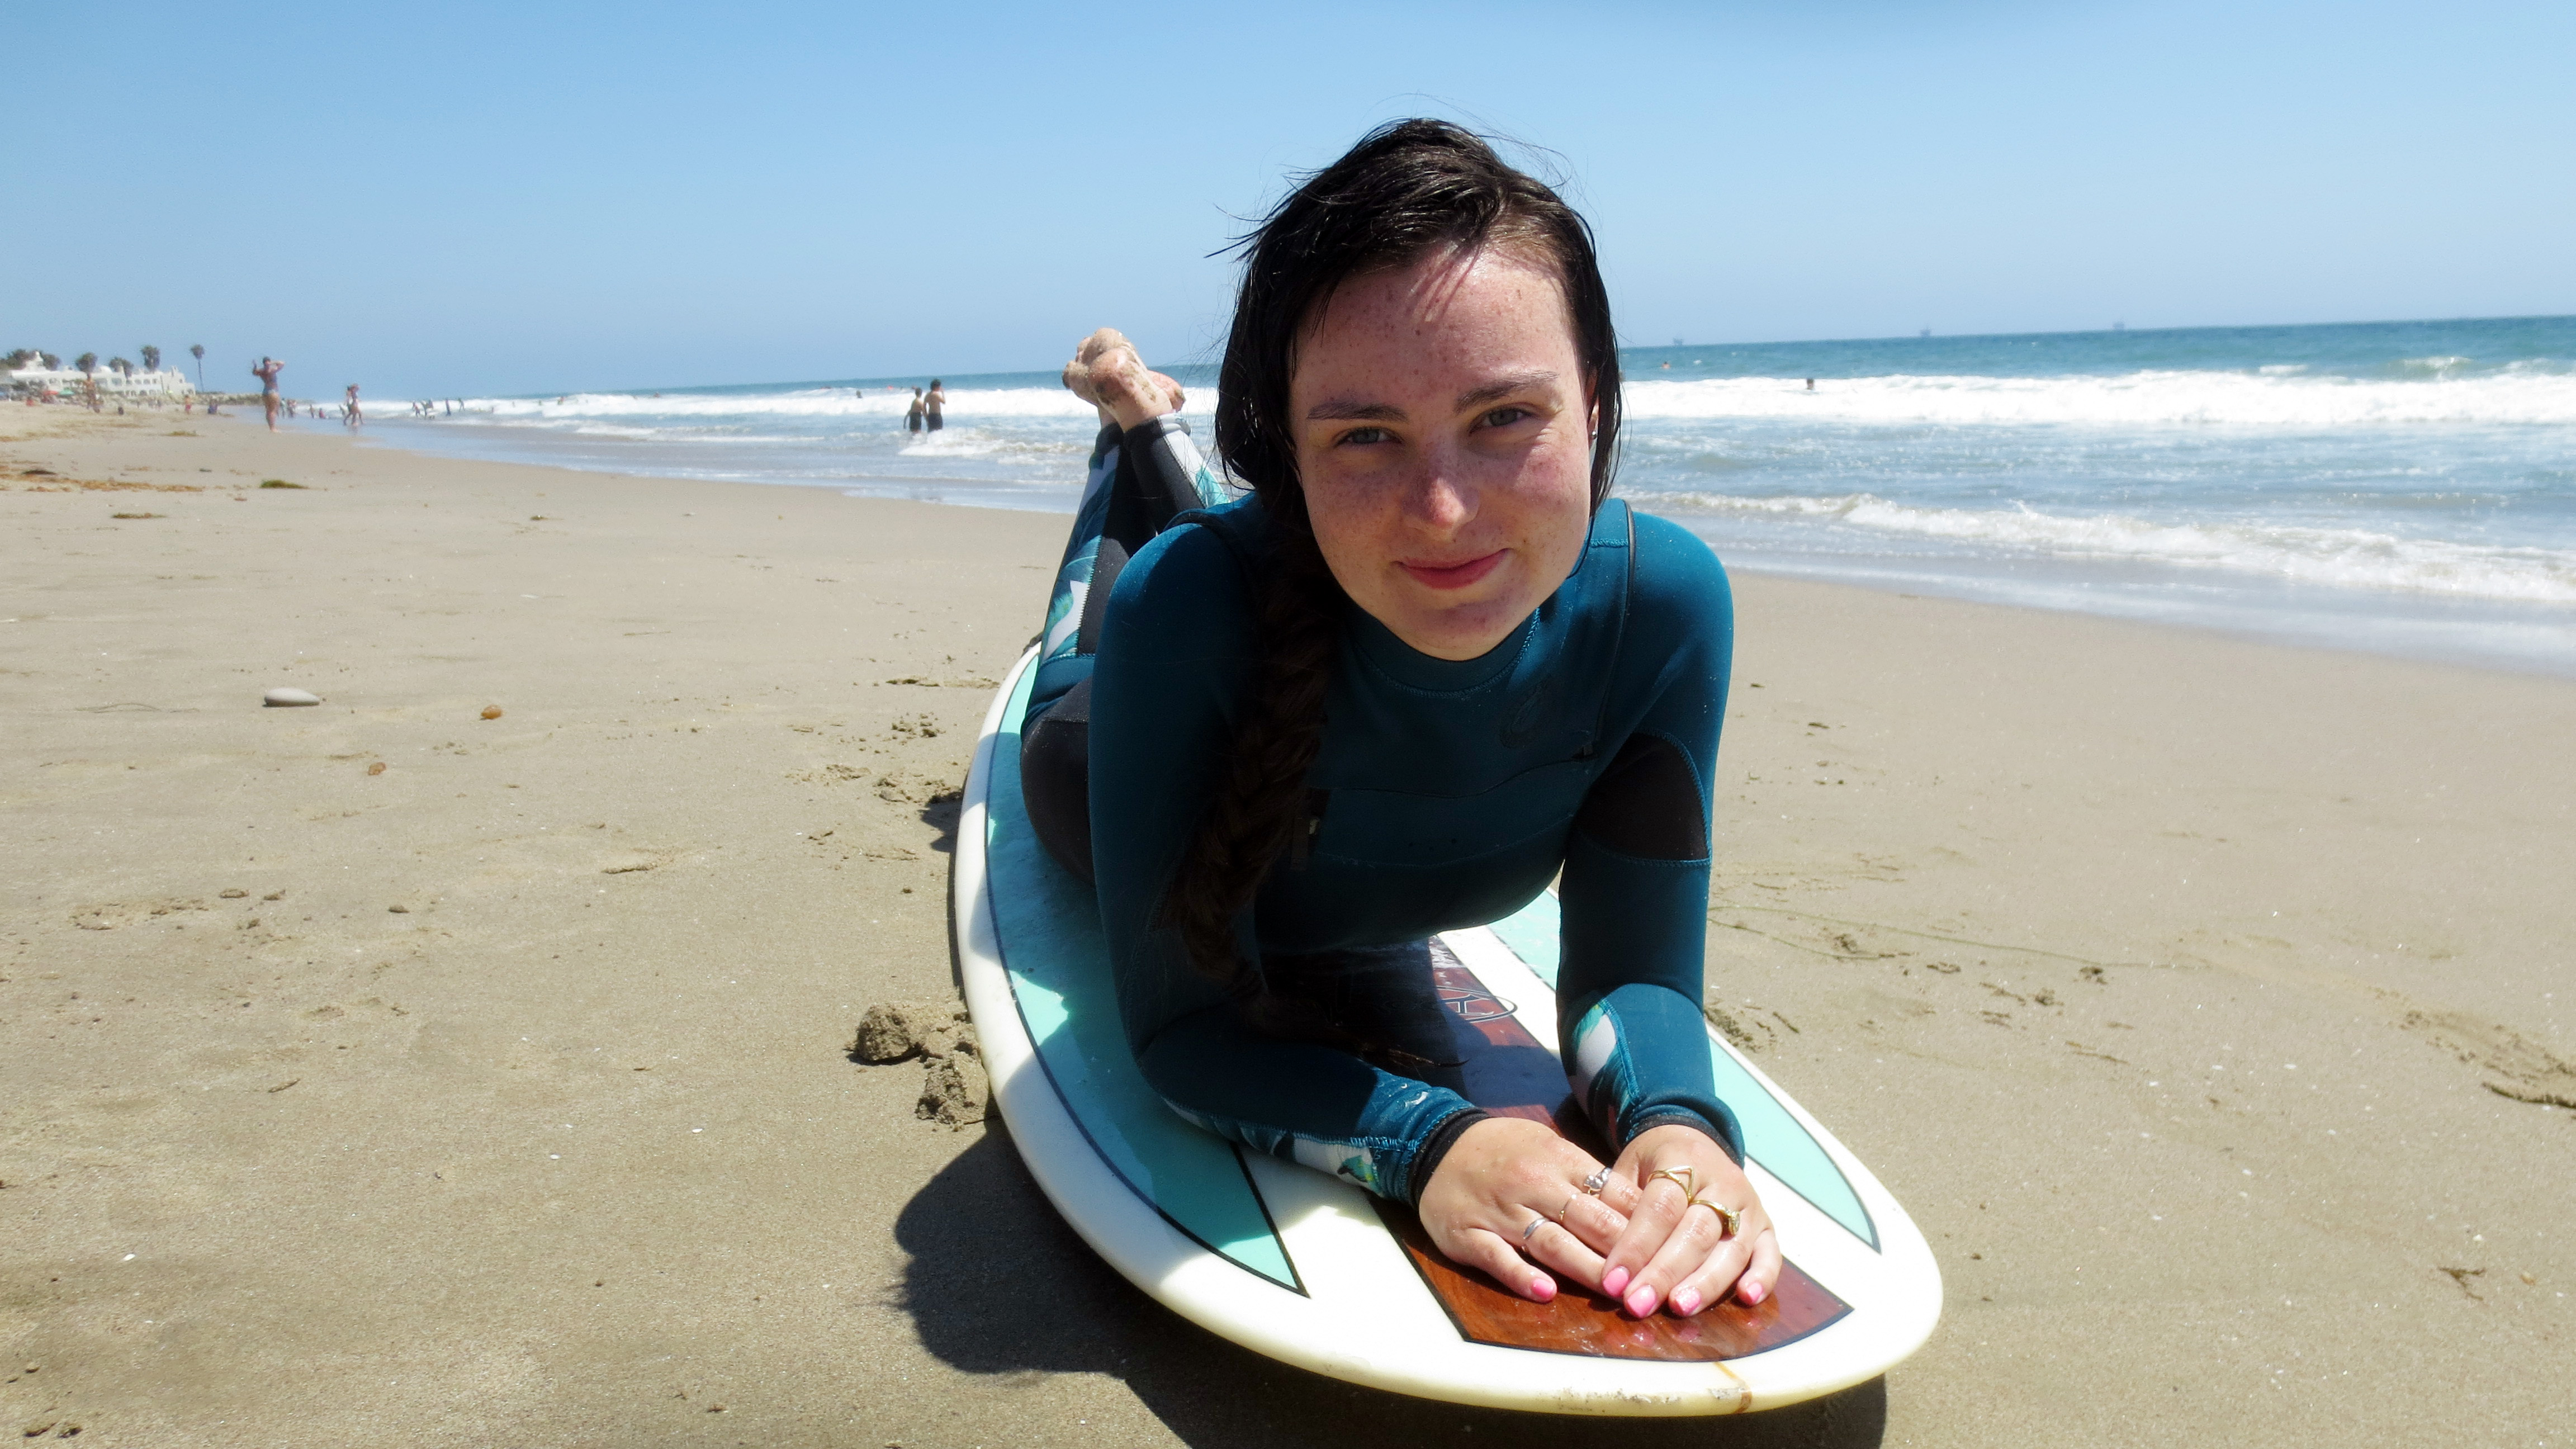 AMI This Week’s Molly Burke lies on her surfboard on a sunny California beach wearing a stylish Billabong wetsuit, waves lapping in the background.